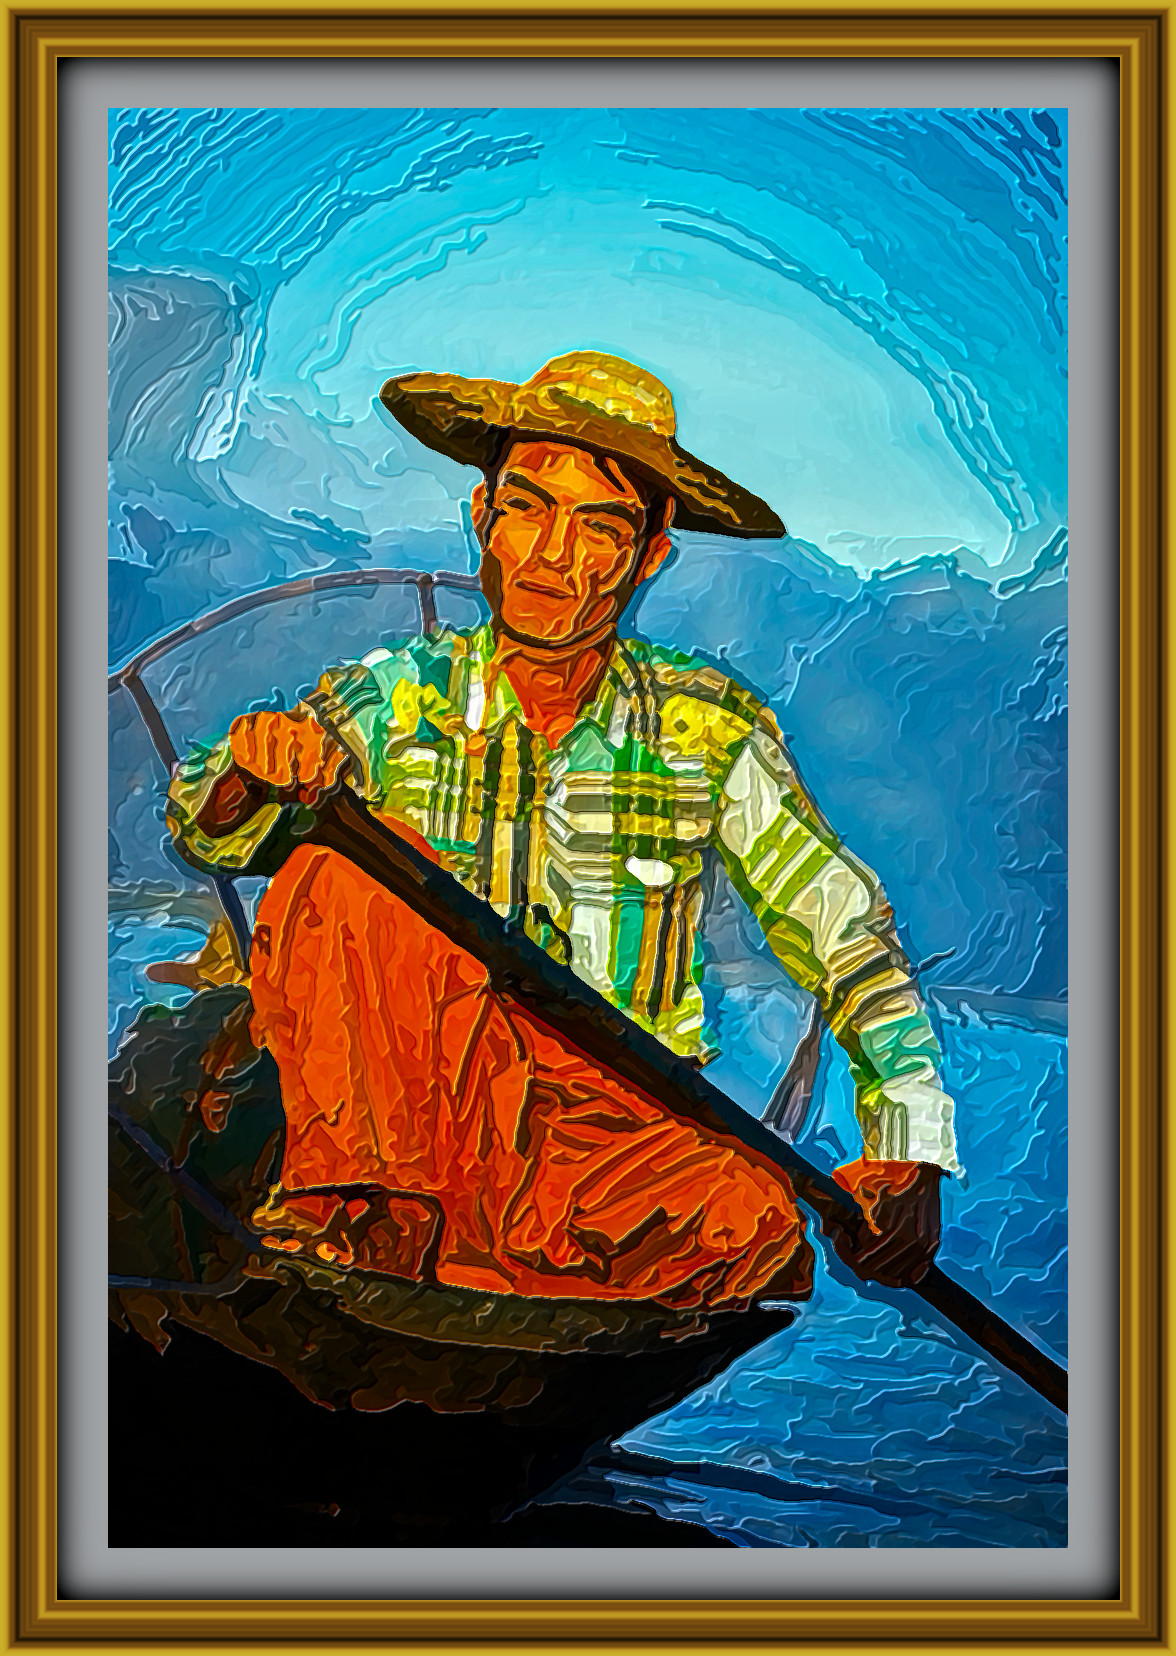 2024-02-15 09-50-01 Inle_Lake_Fisherman_Portrait_Myanmar_Colby_Brown_2 with JVID Embossed Graphic Effect, parms=1, 127.0, 6.0, 8.0, 7.5, 9.75, 1.5, 0.0, 0.jpeg